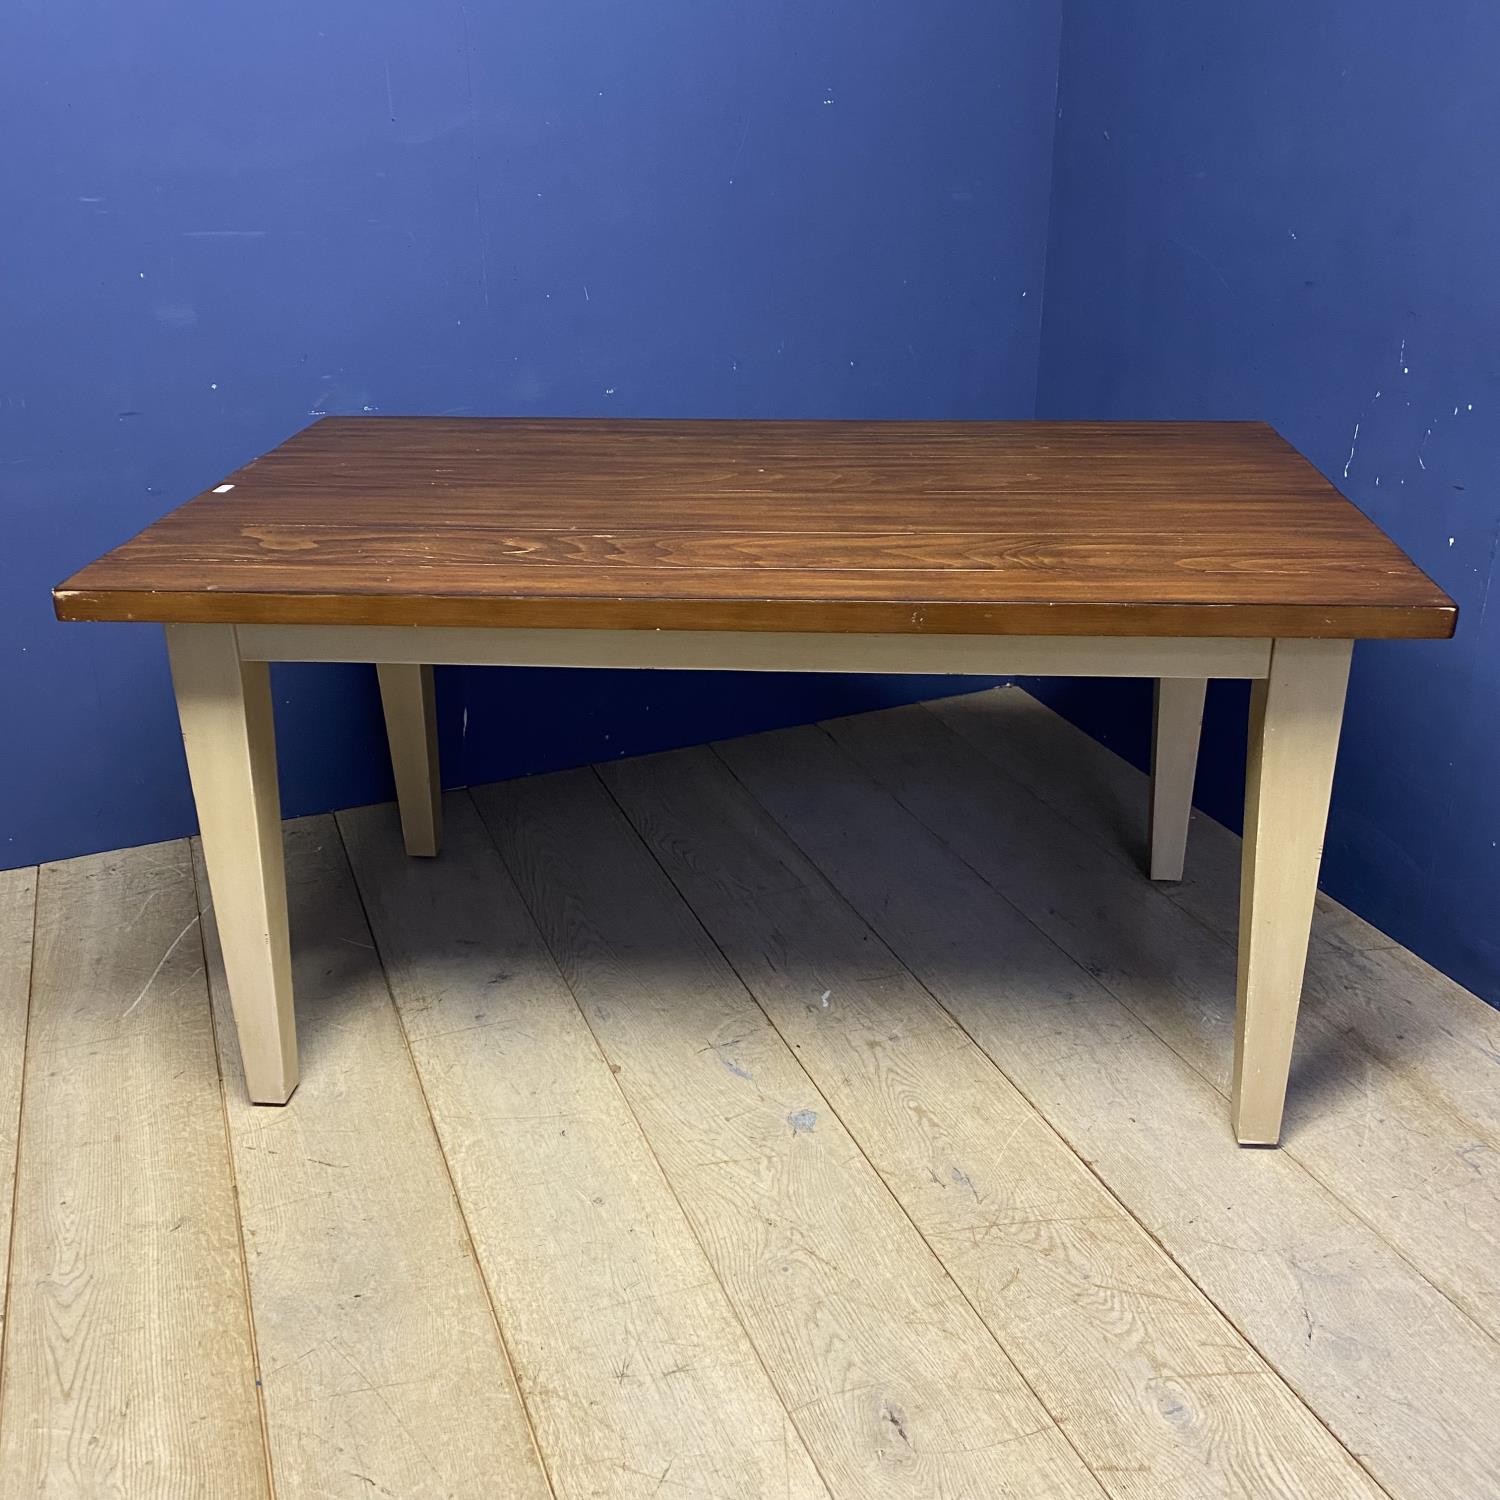 Refrectory style plank top kitchen table with painted leg, 153cmL x 92cmW x 77cmH, as found